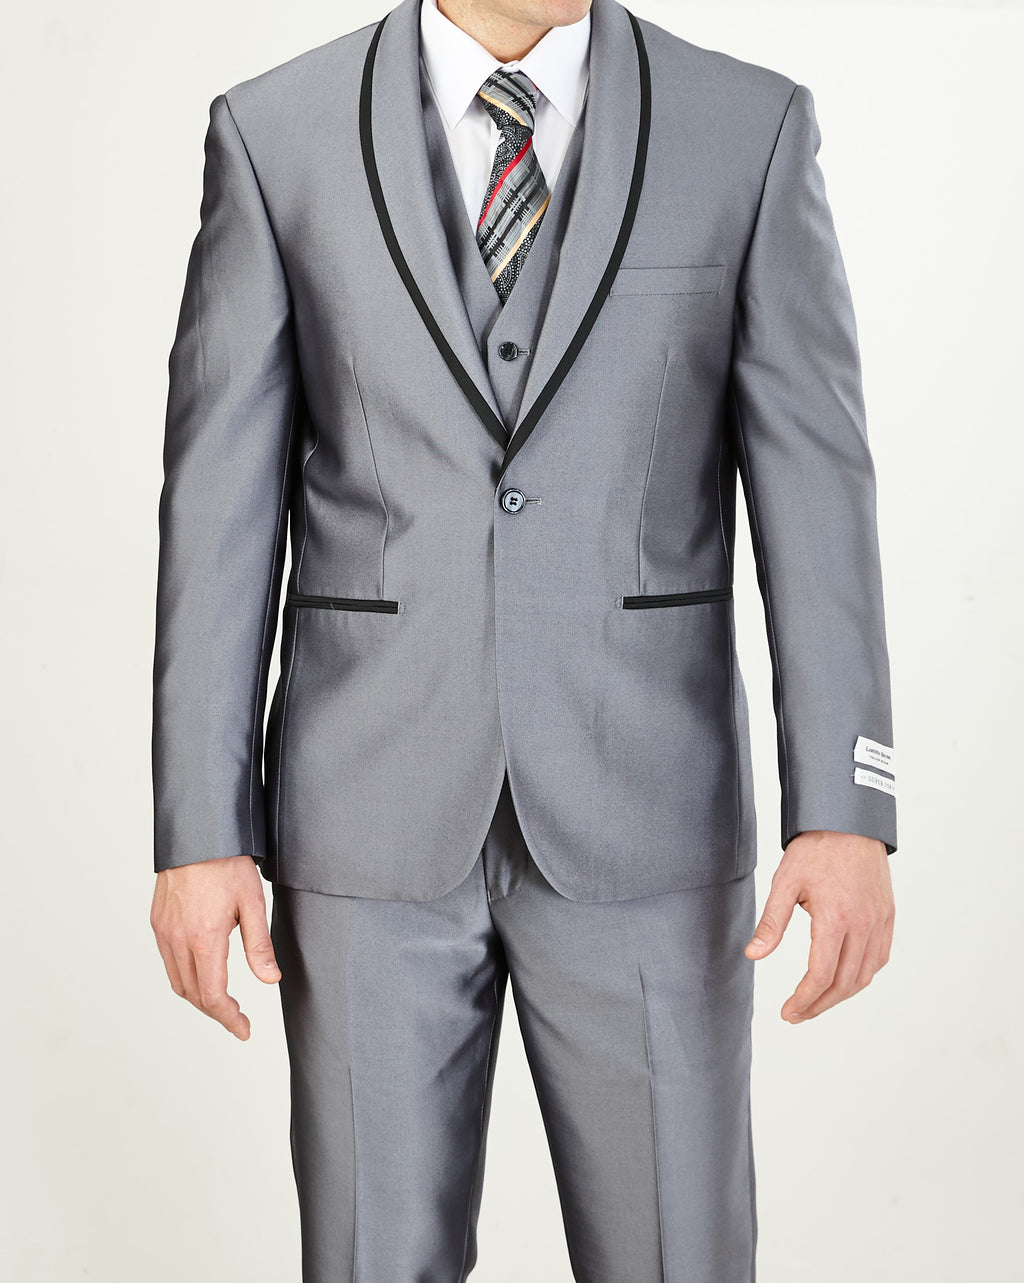 Buy Stylish Suits For Men in India | Tuxedo Suits & More